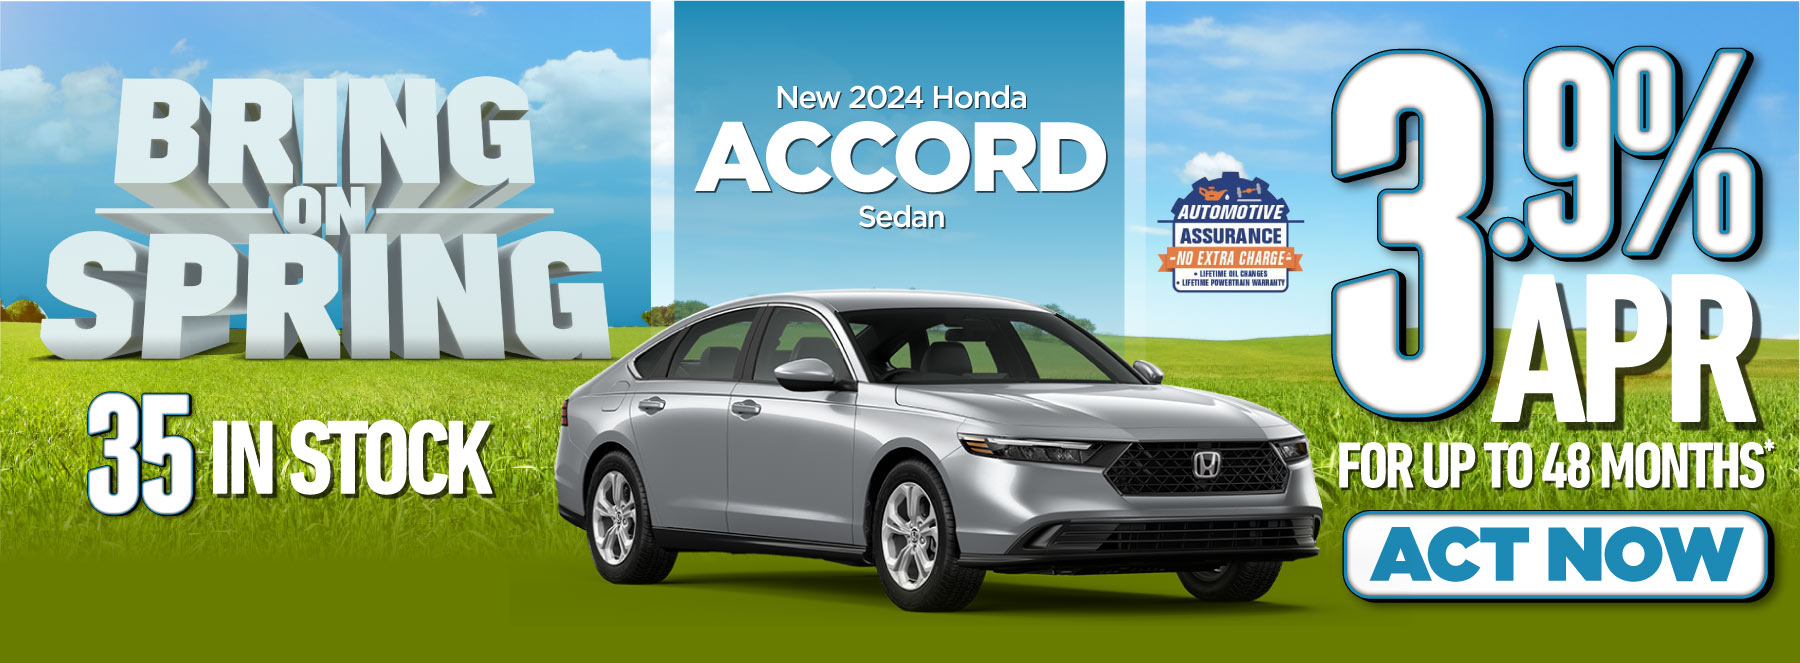 New 2024 Honda Accord Sedan - Get 3.9% APR for up to 48 months* | Act Now